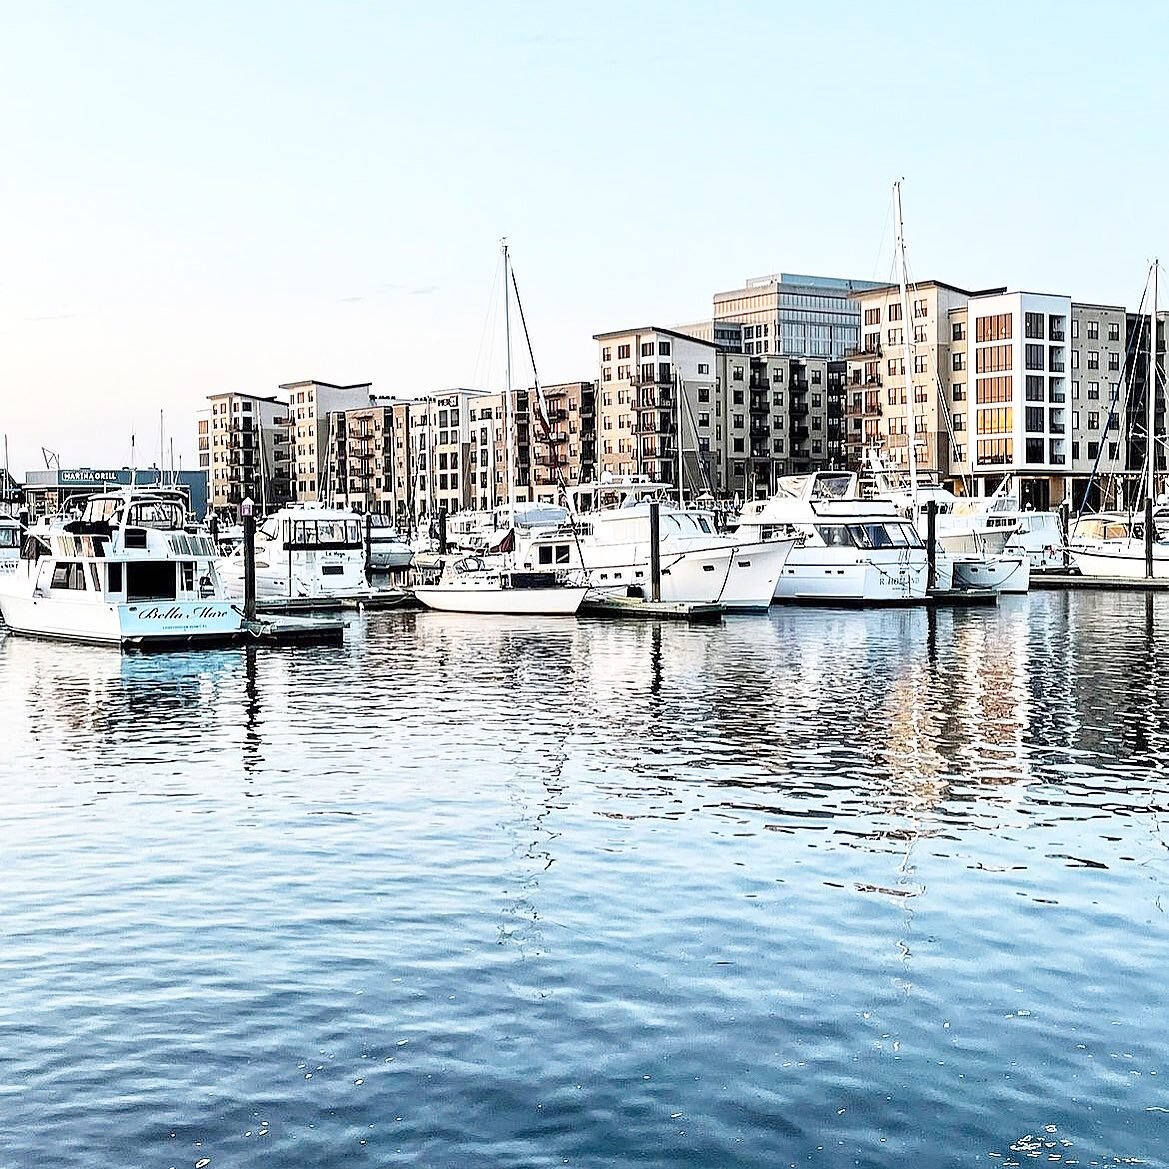 We are so grateful for all of the new local connections we&rsquo;ve made throughout Wilmington and Wrightsvillle during our launch!

If you haven&rsquo;t jumped onto wilmingtondays.com yet, check us out and sign up for our newsletter!

📷 from @pier3